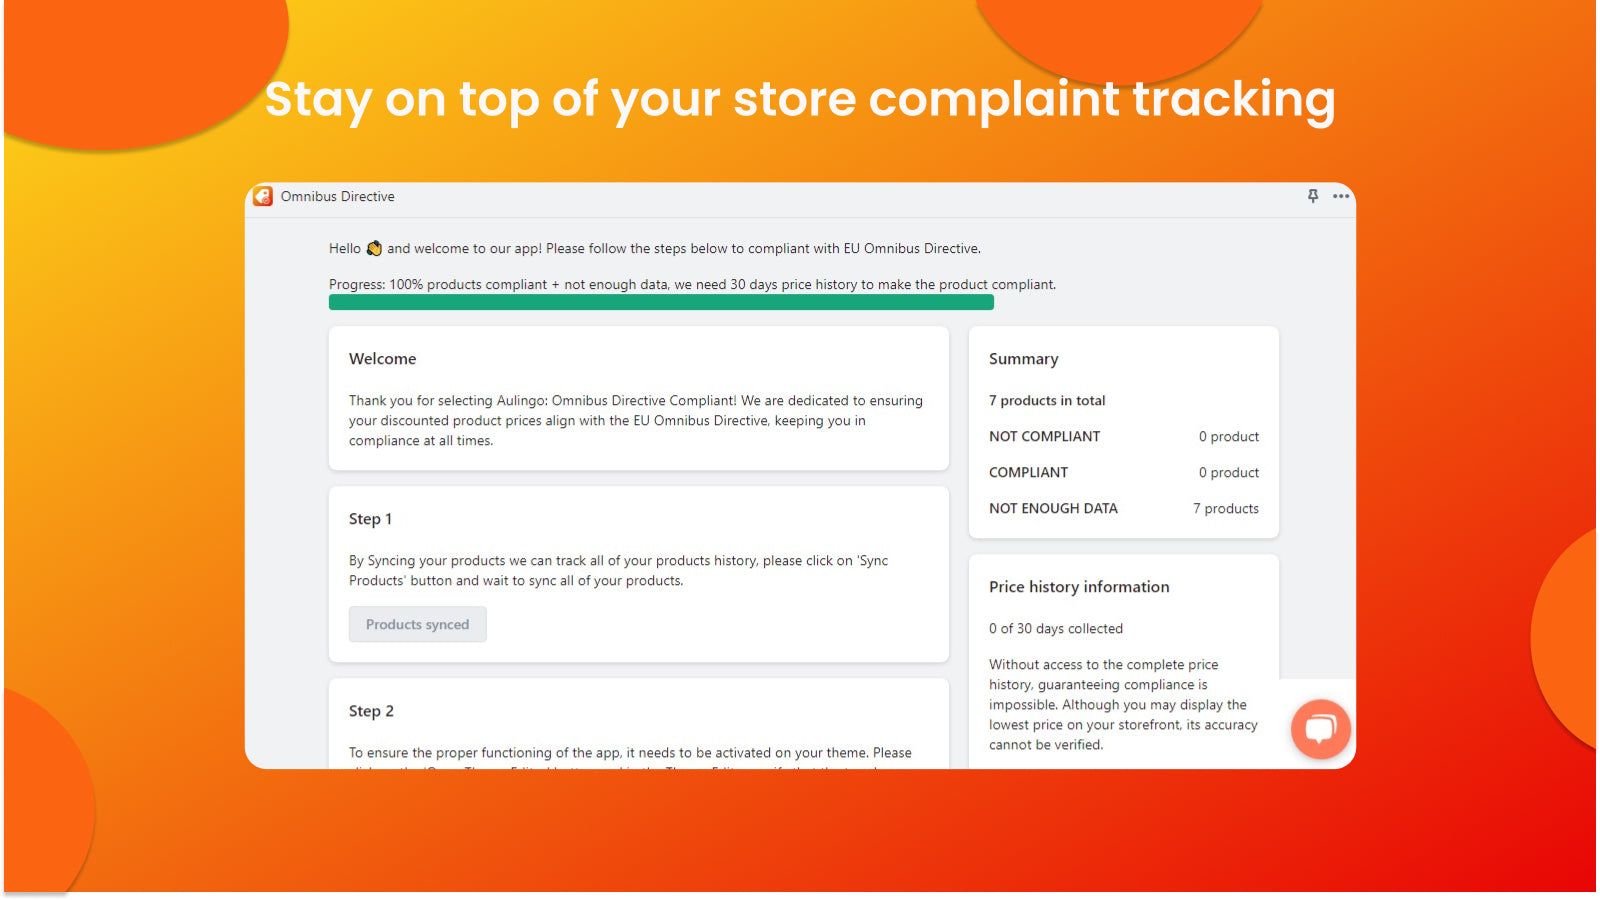 Stay on top of your store complaint tracking